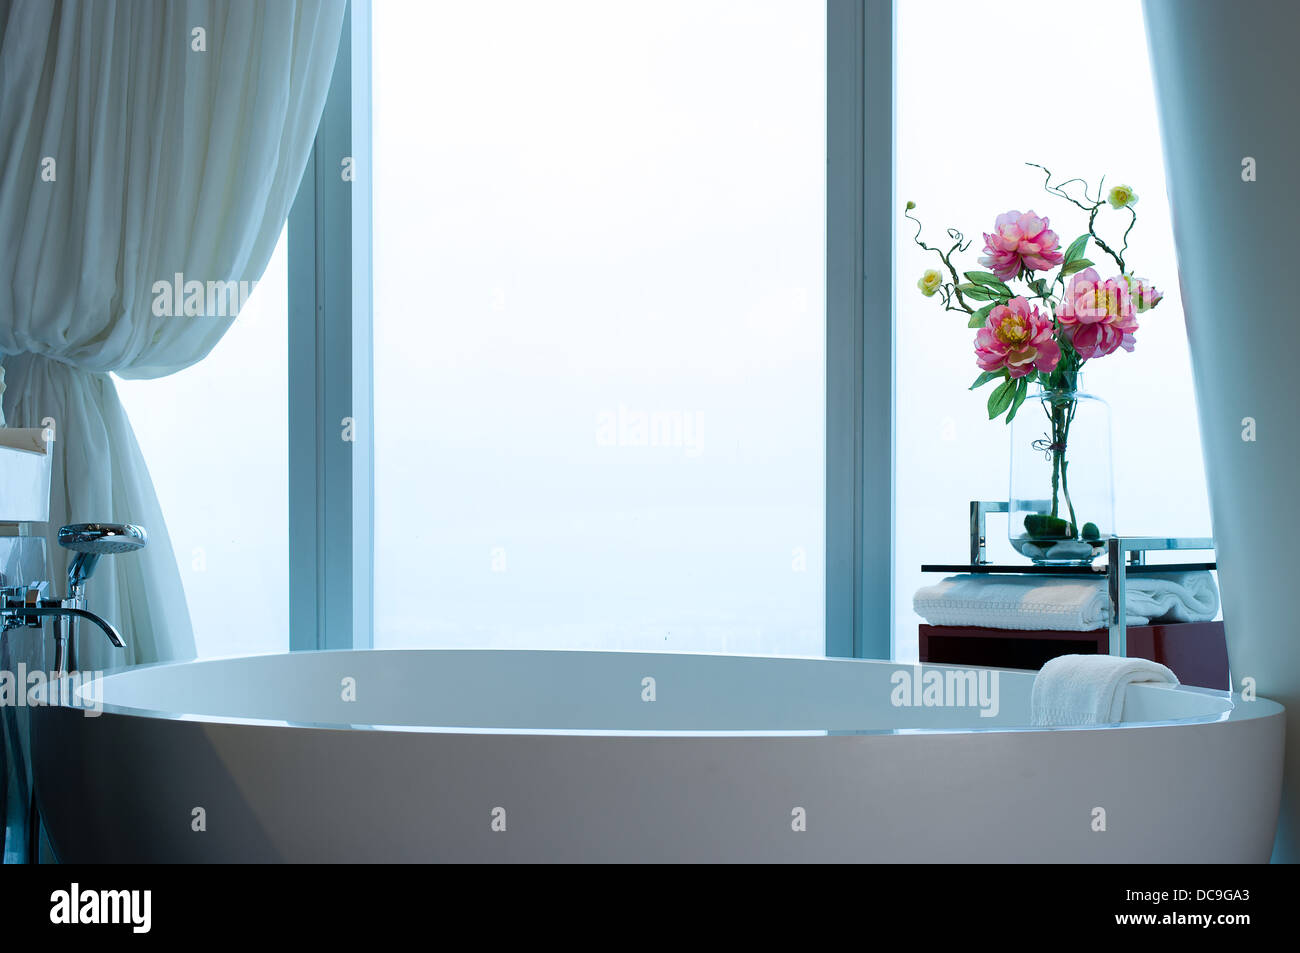 5 Five Star hotel bathroom with flower silent bright Stock Photo